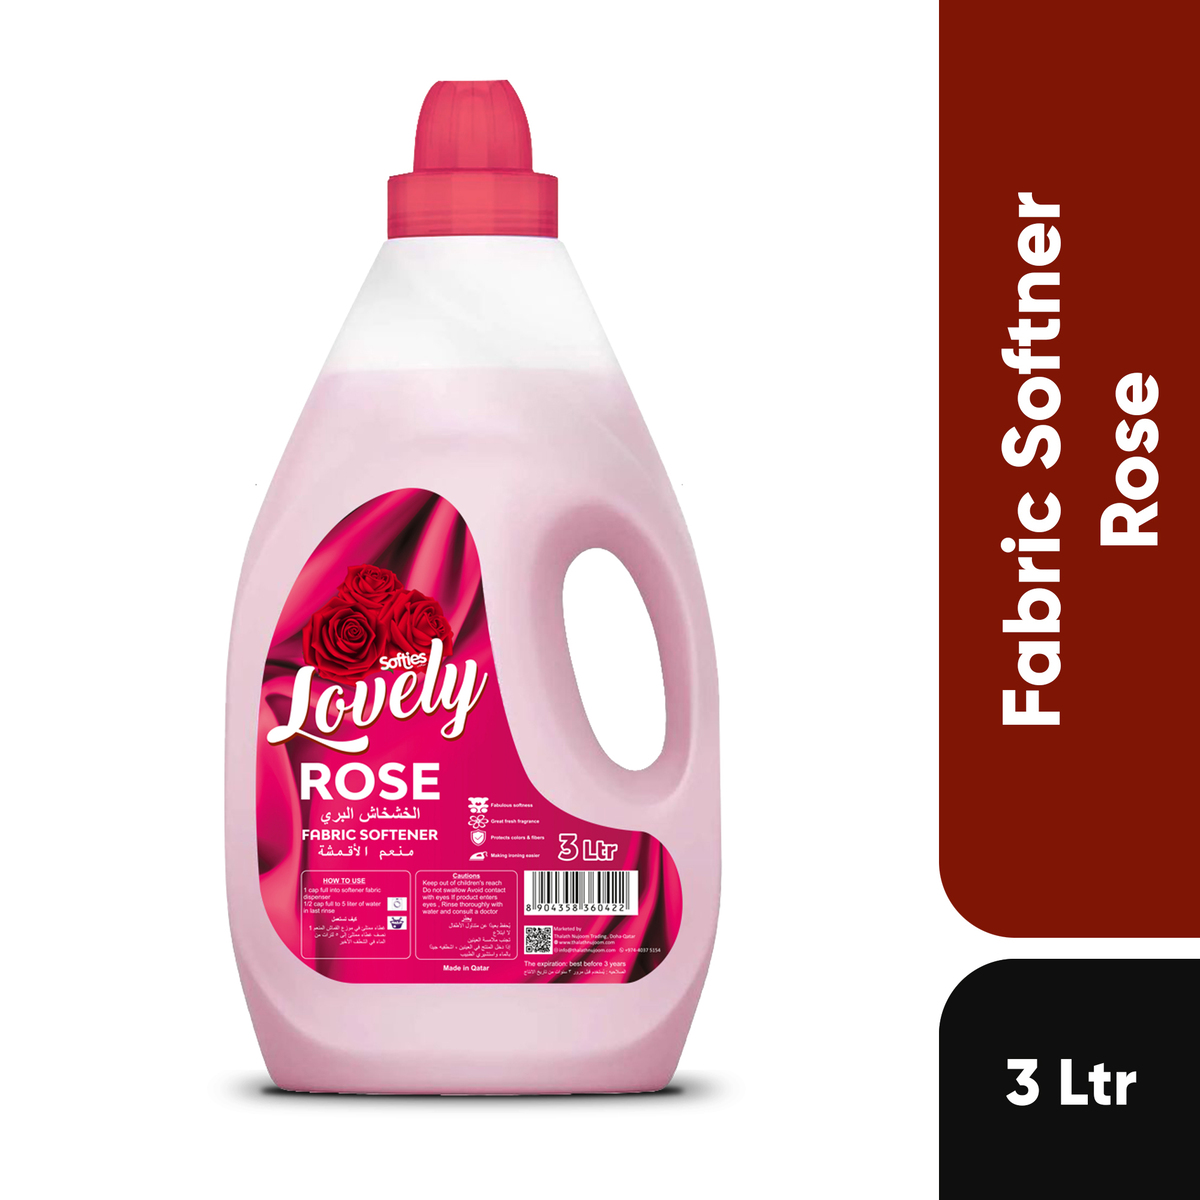 Softies Lovely Rose Fabric Softener 3 Litres